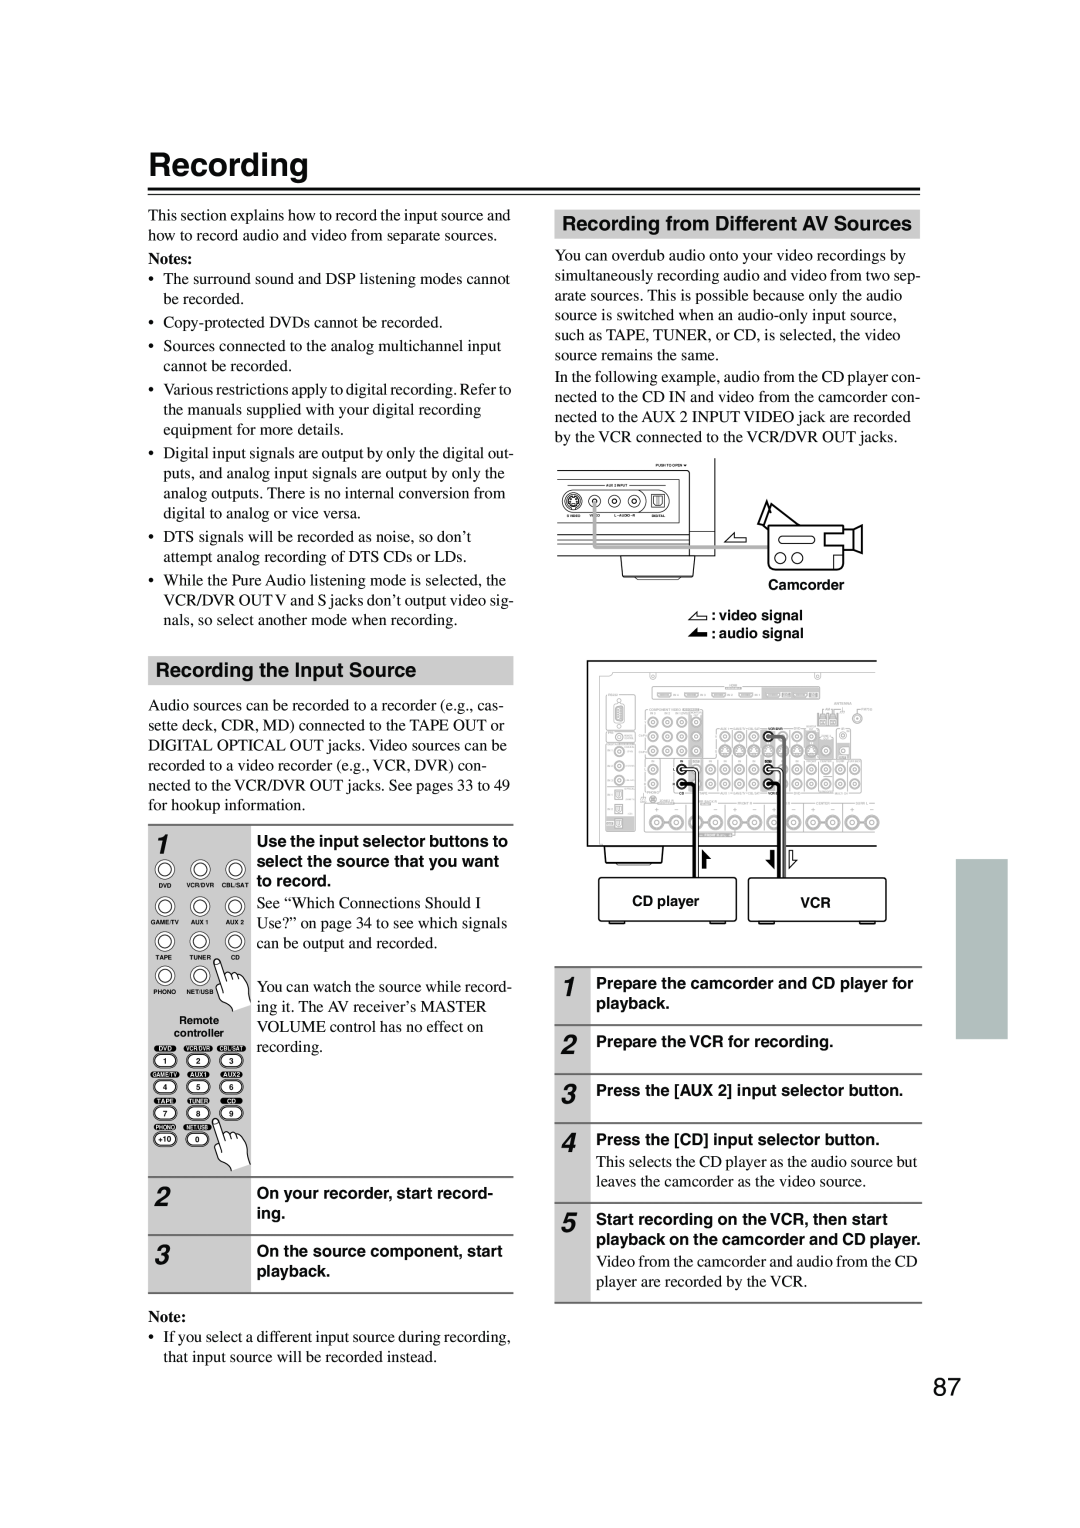 Onkyo TX-NR905 instruction manual Recording the Input Source, Recording from Different AV Sources, Notes 